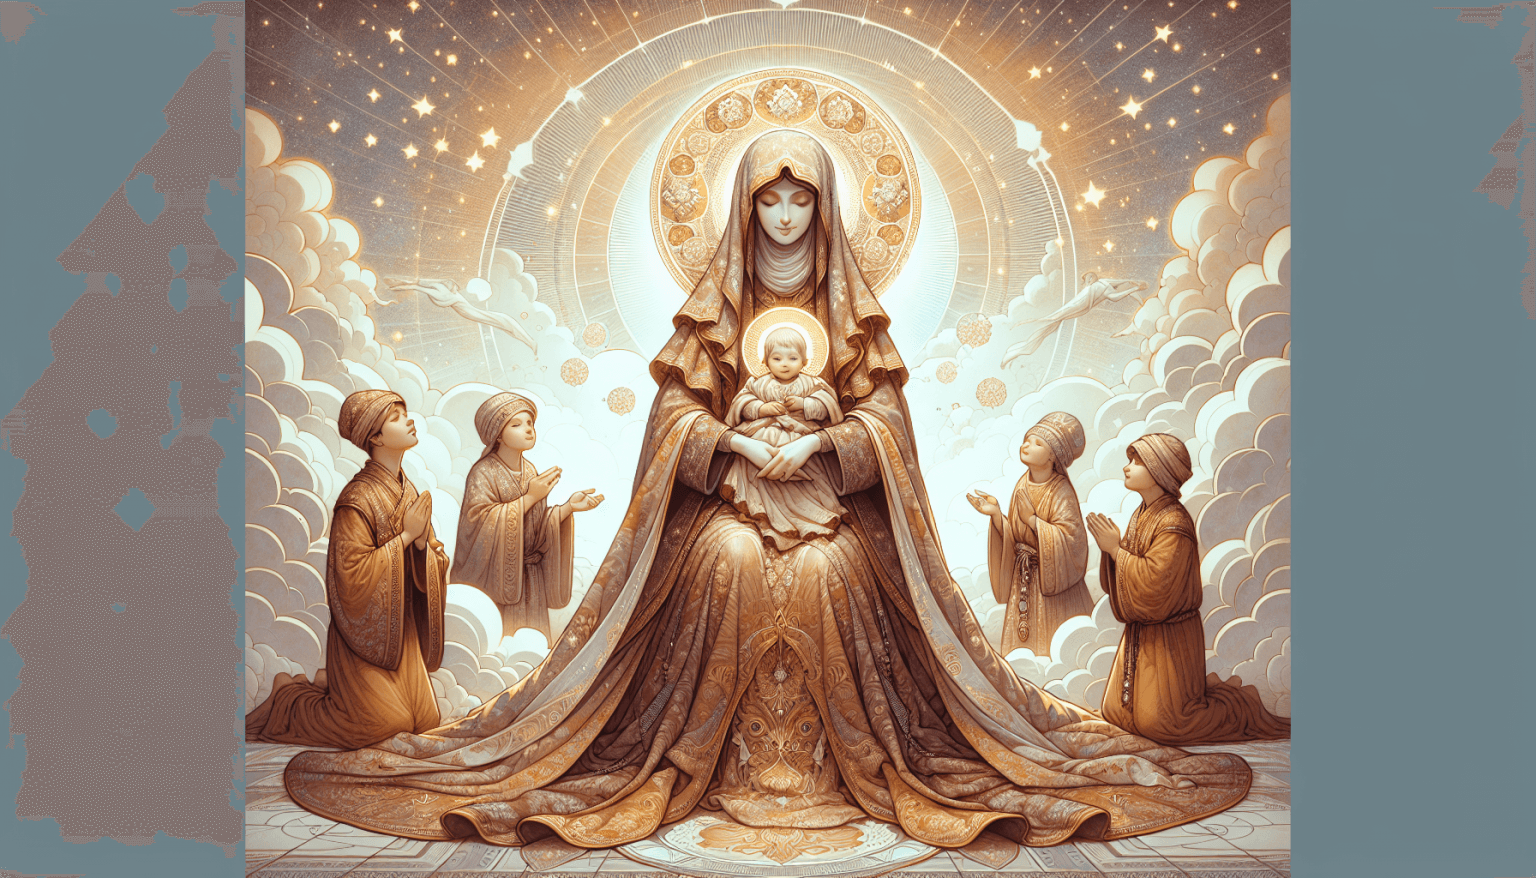 An ethereal and serene image of the Virgin del Carmen, bathed in a soft, heavenly glow. She is adorned in flowing, richly detailed garments with warm tones of brown and gold. In her arms, she cradles